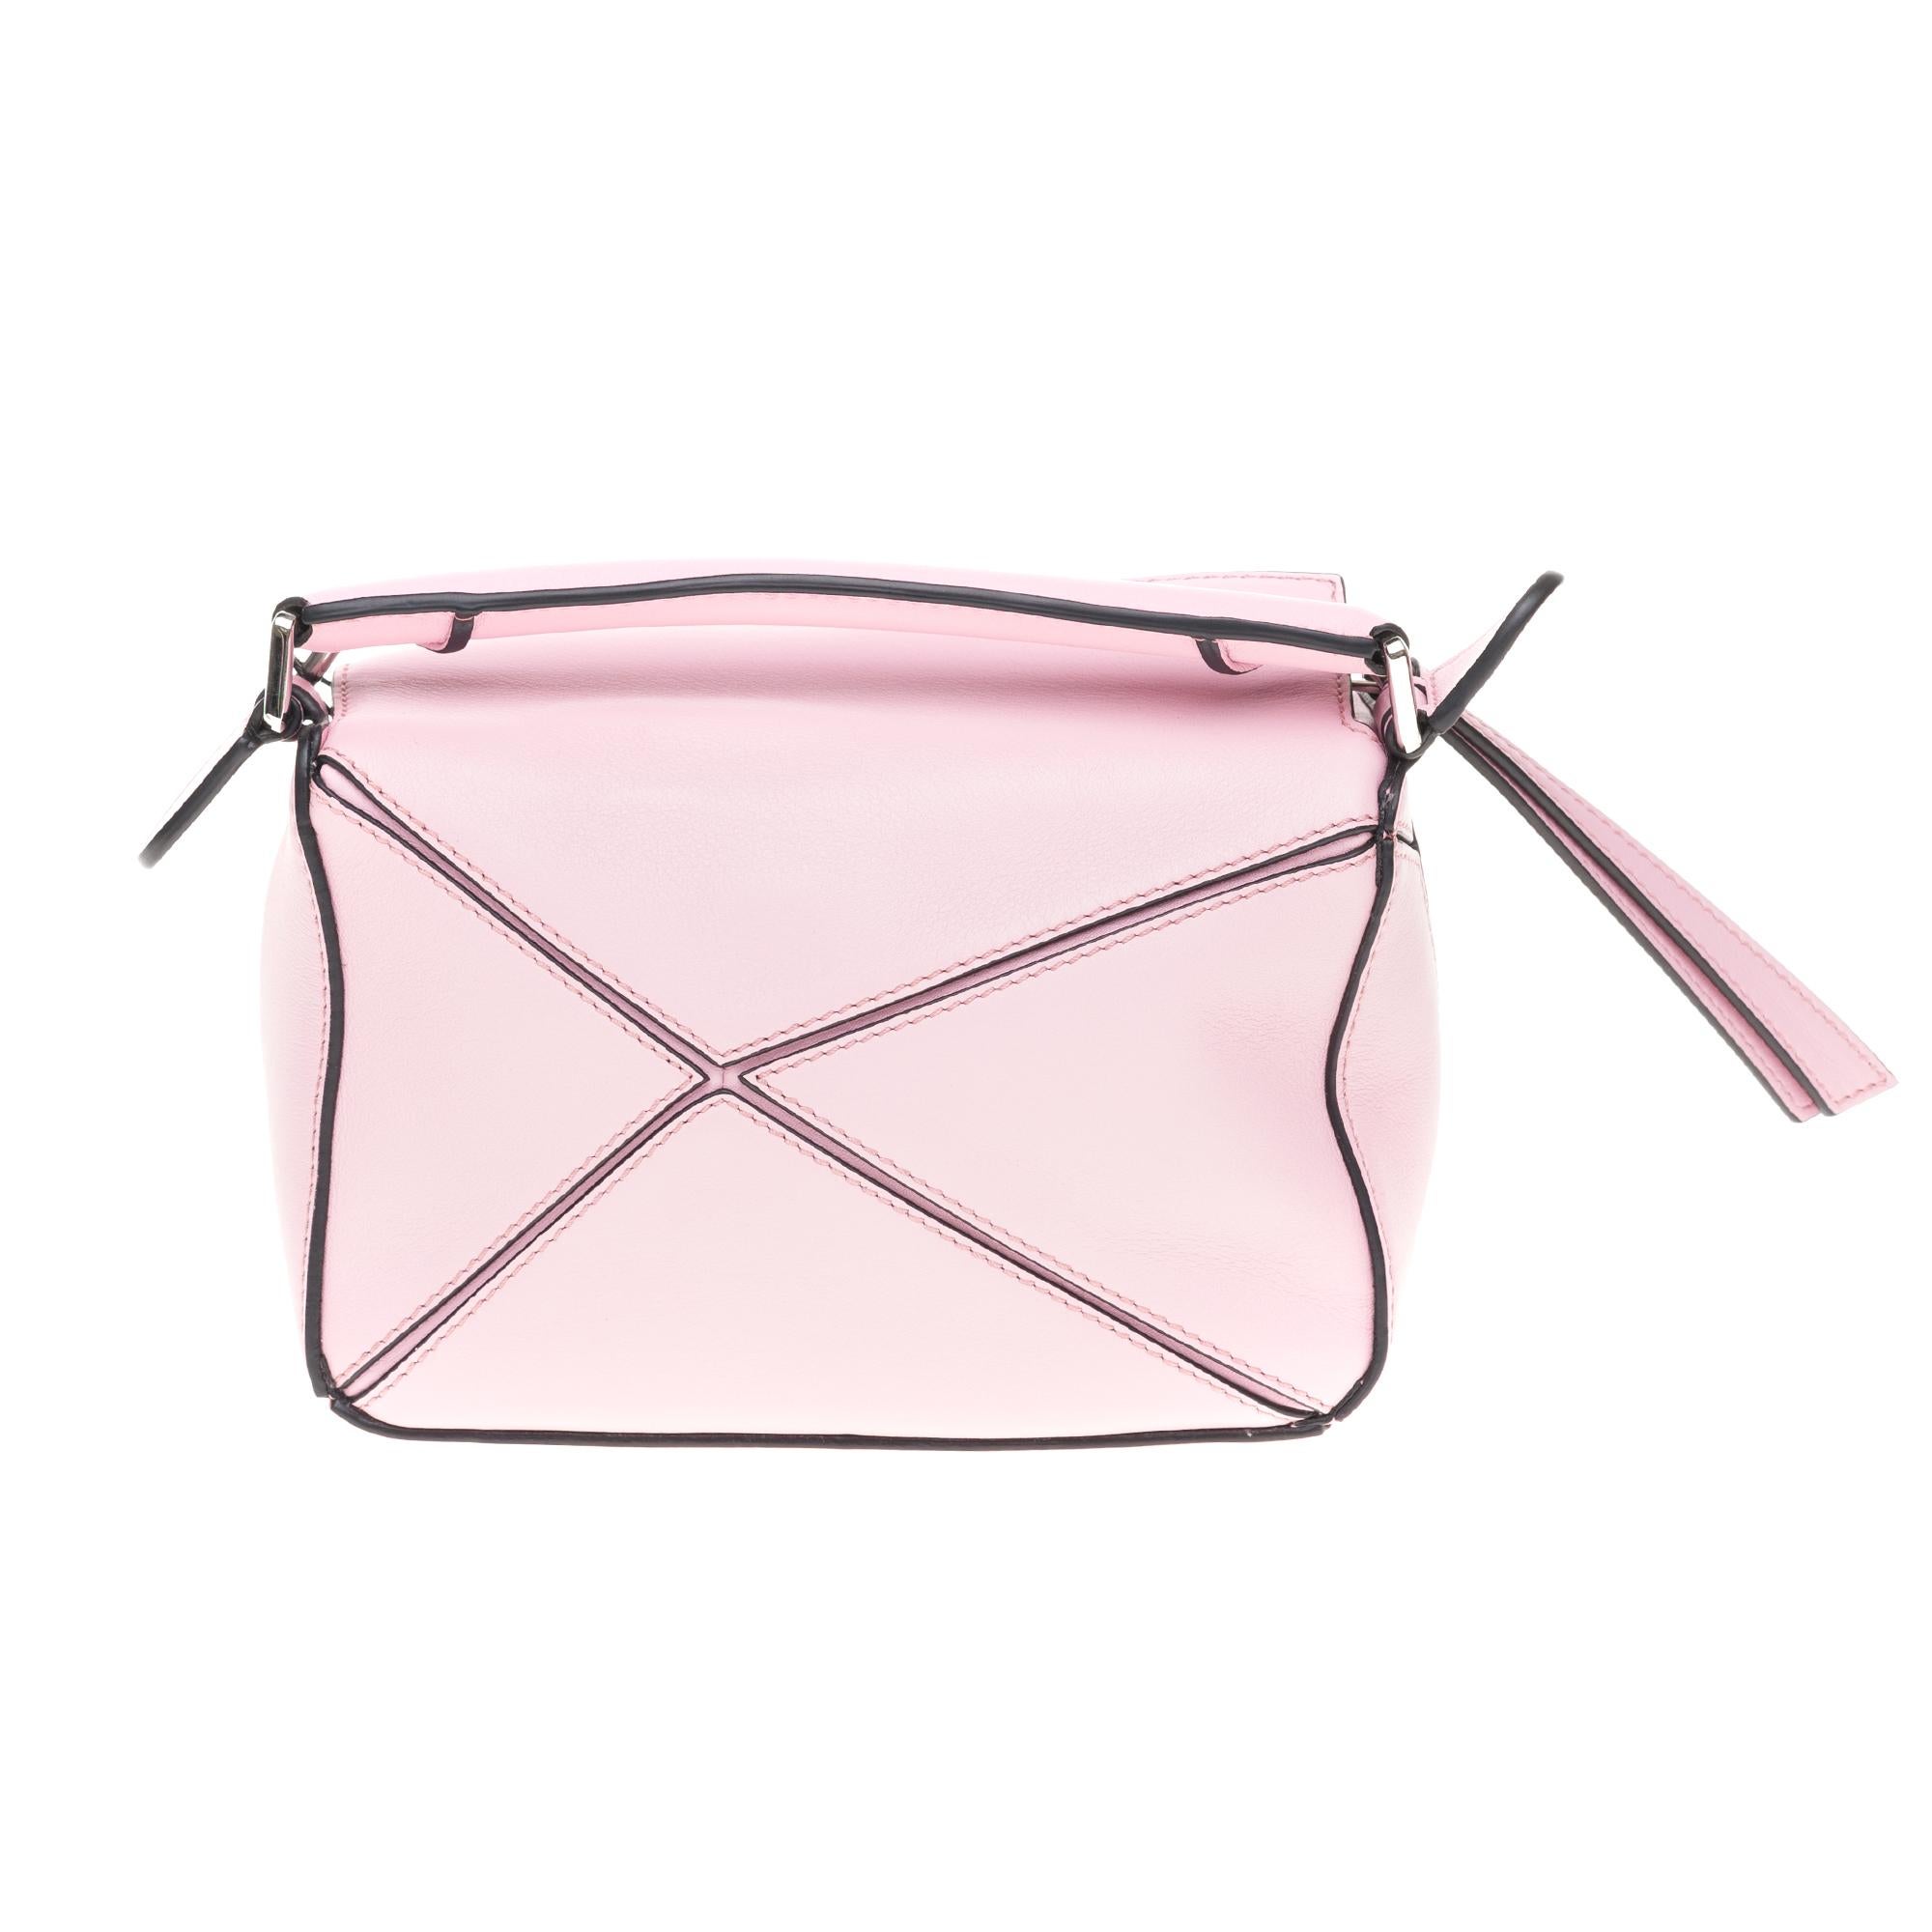 Innovative cuboid bag crafted using precisely cut leather facets that combine to create its voluminous shape and versatile form, which can fold complete flat. Introduced in this irresistible mini size.
- Crossbody, shoulder, top handle or clutch